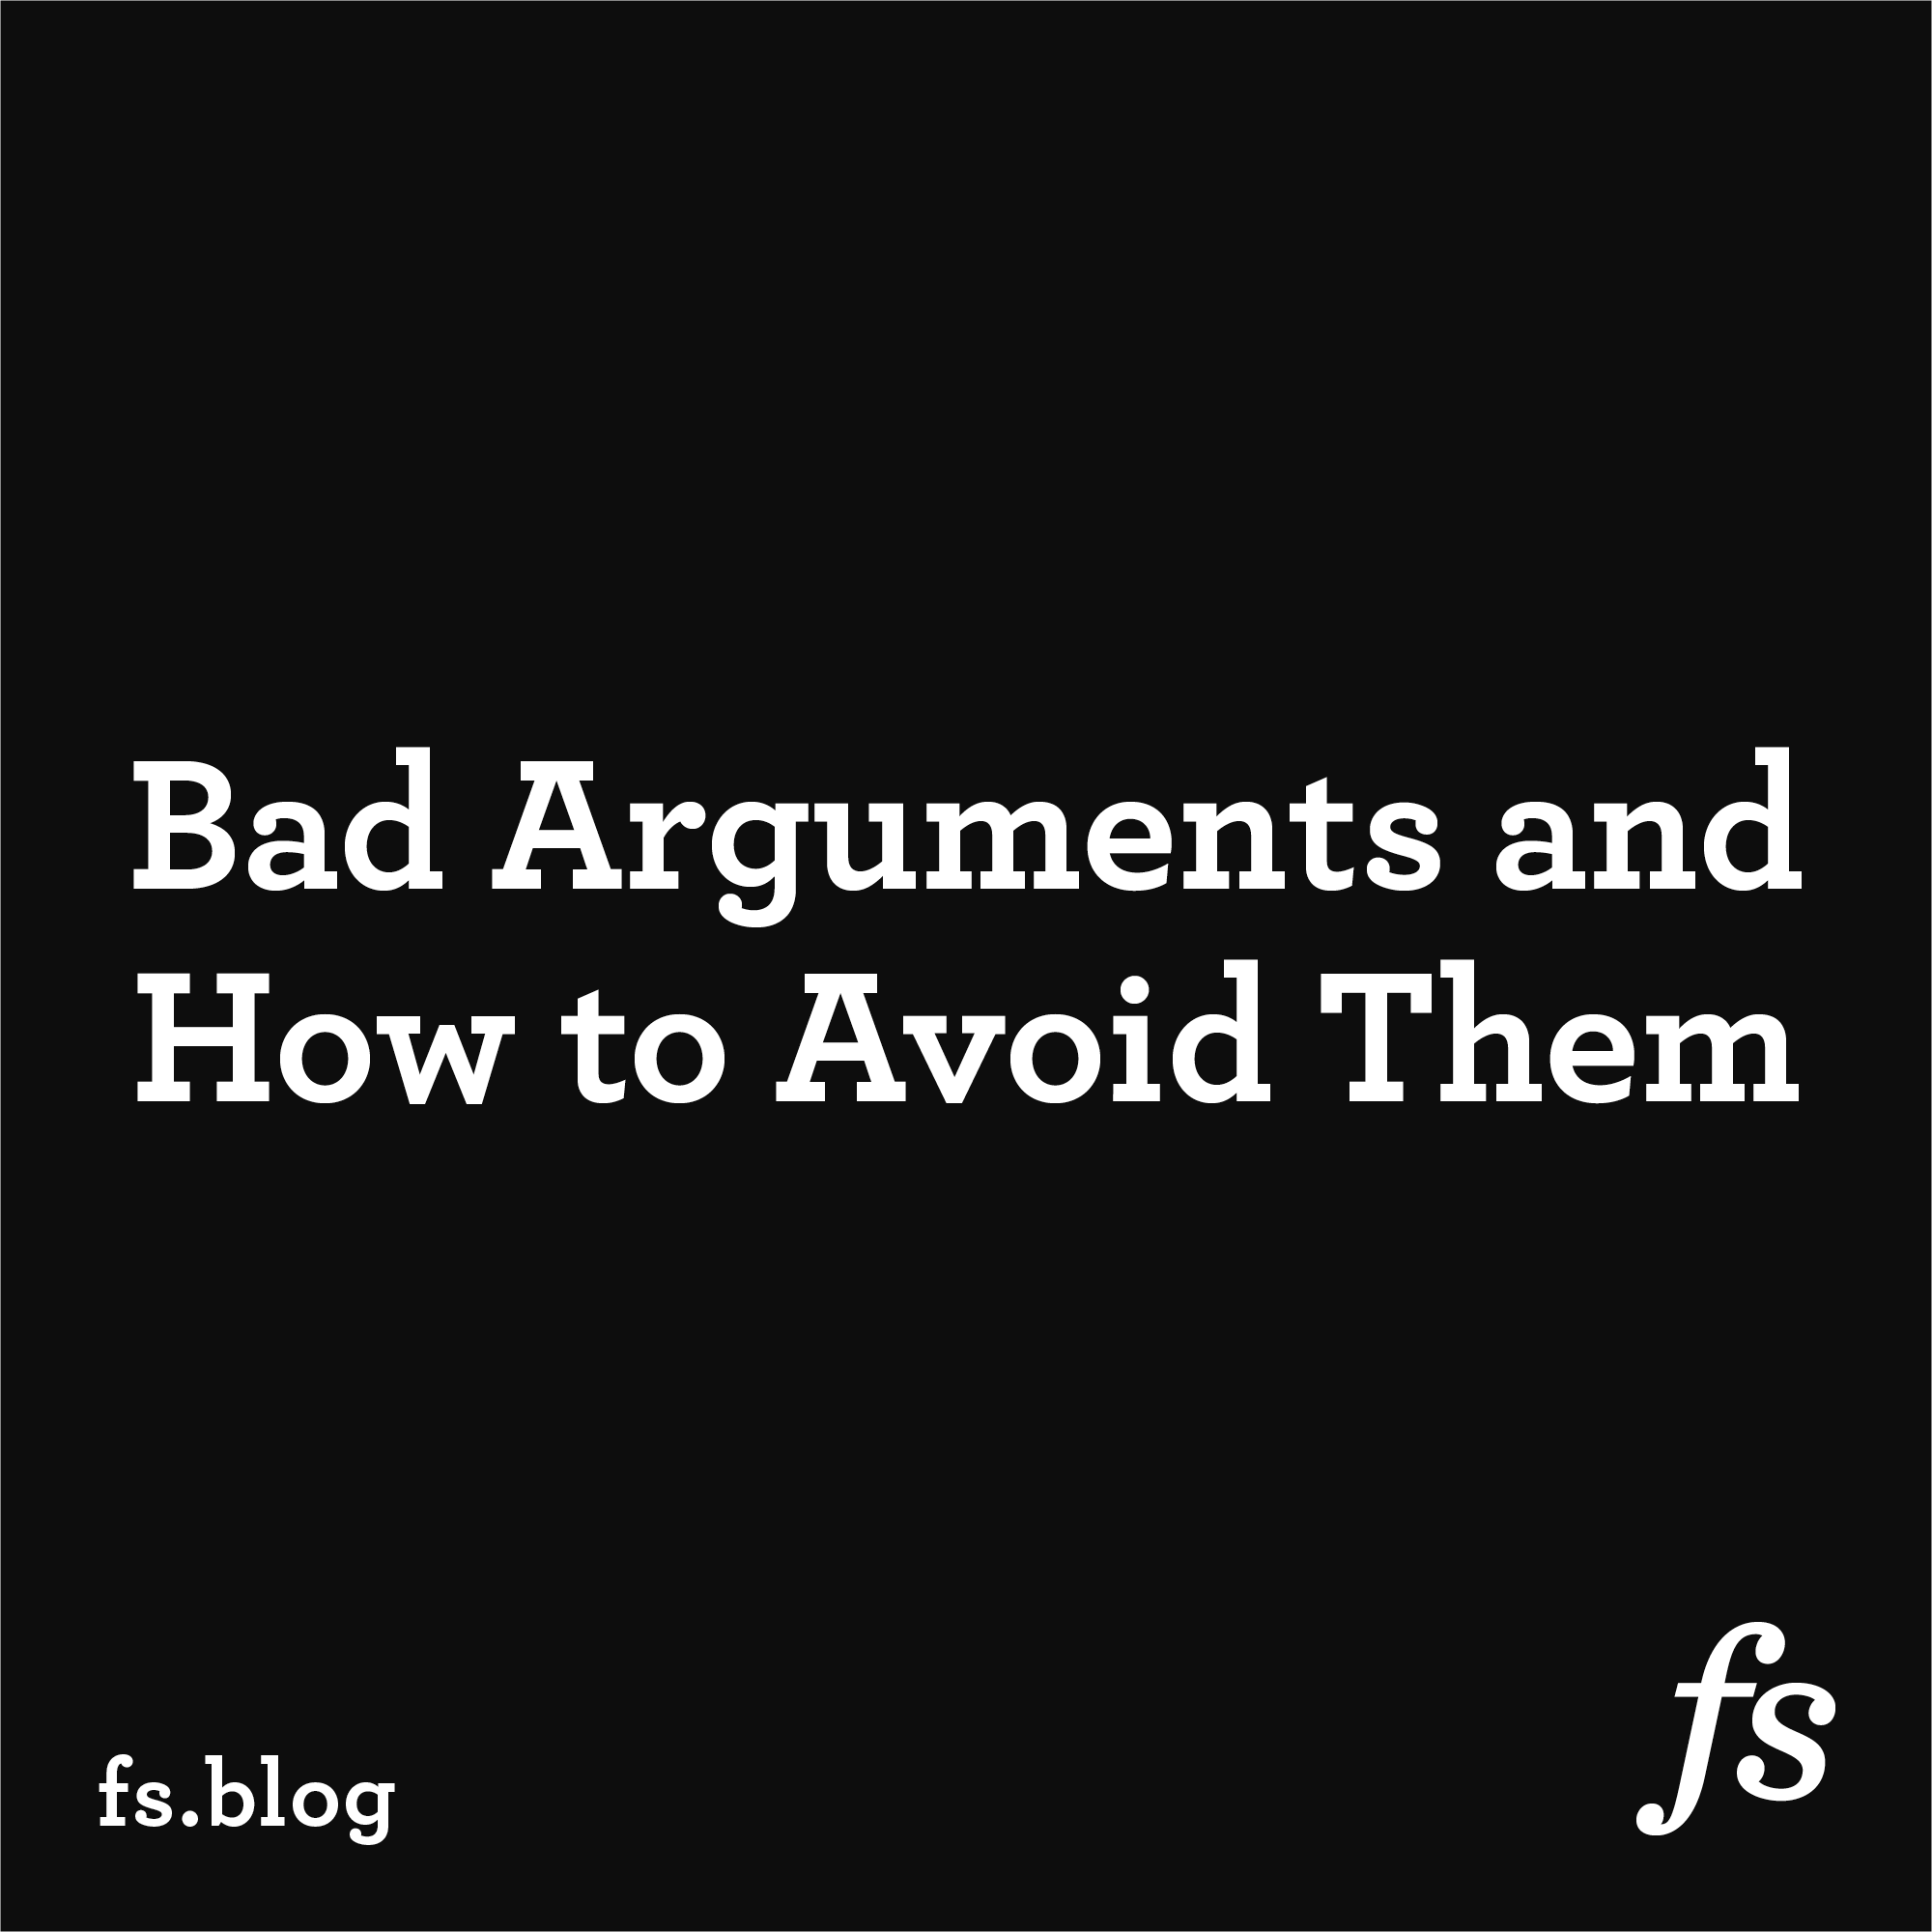 Bad Arguments and How to Avoid Them